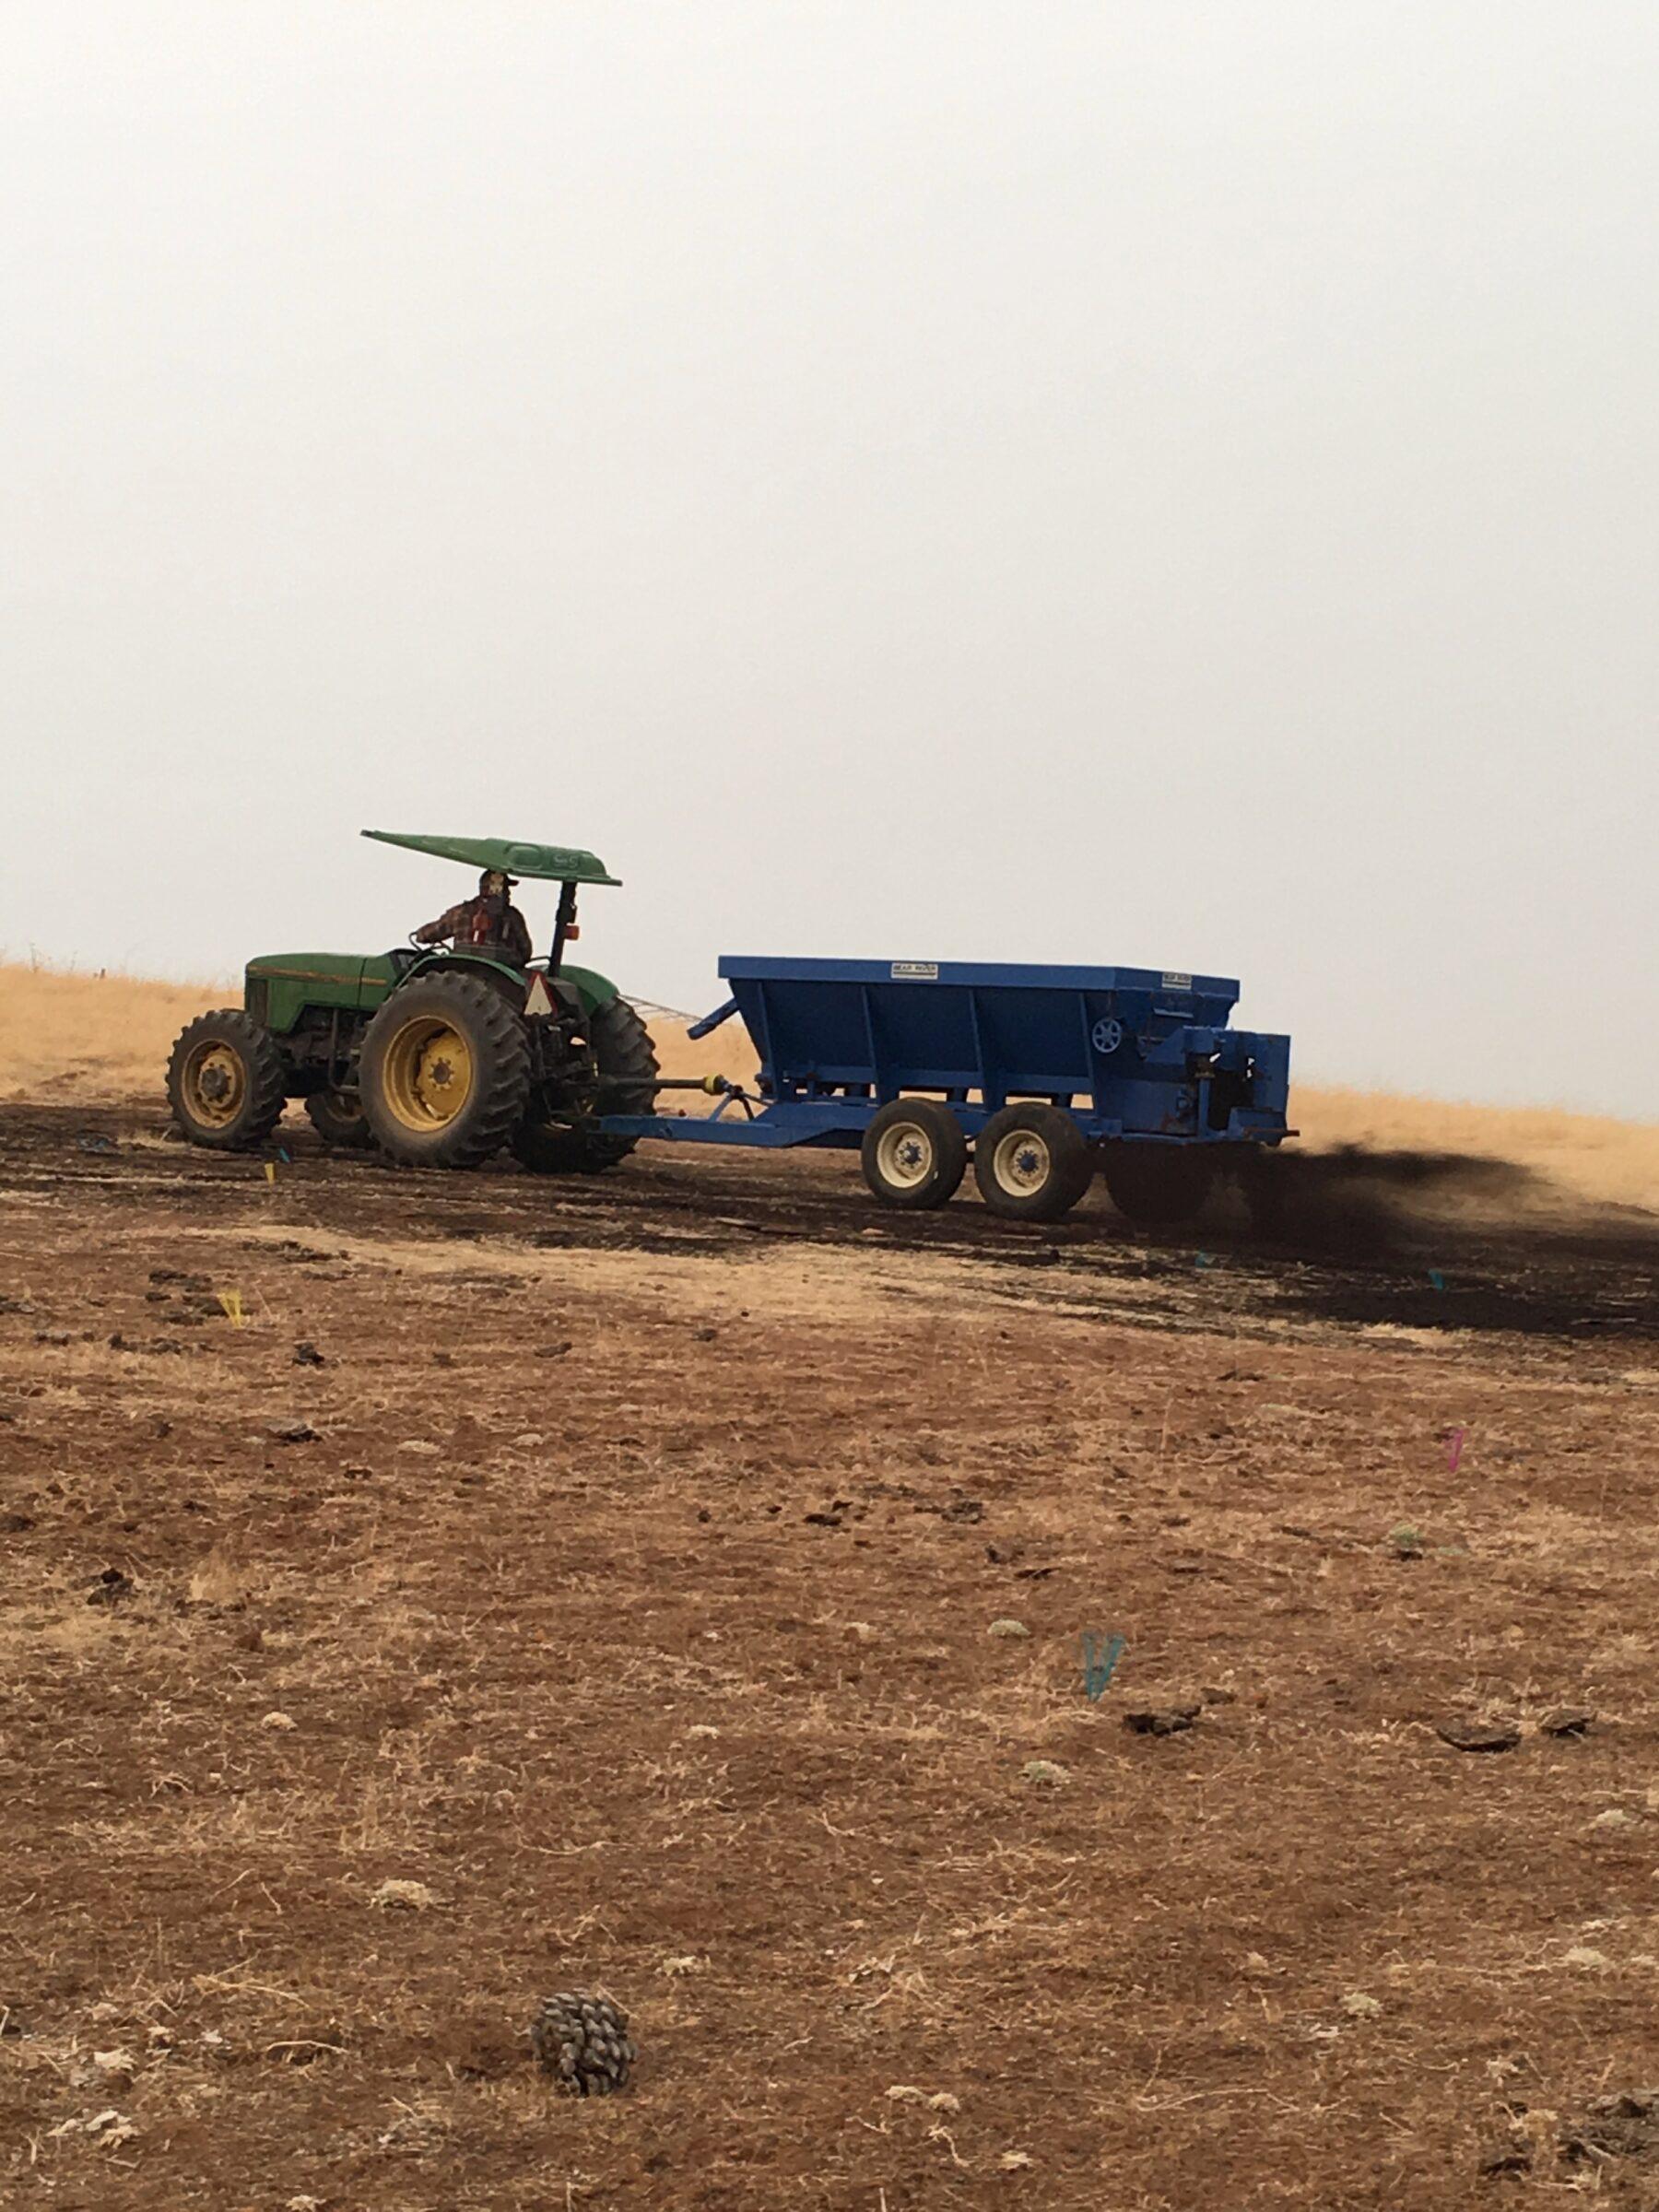 Shaw is studying compost additions to rangelands to determine the effects on soil carbon and plant growth. Compost also changes the soil food web – including the numbers and diversity of nematodes